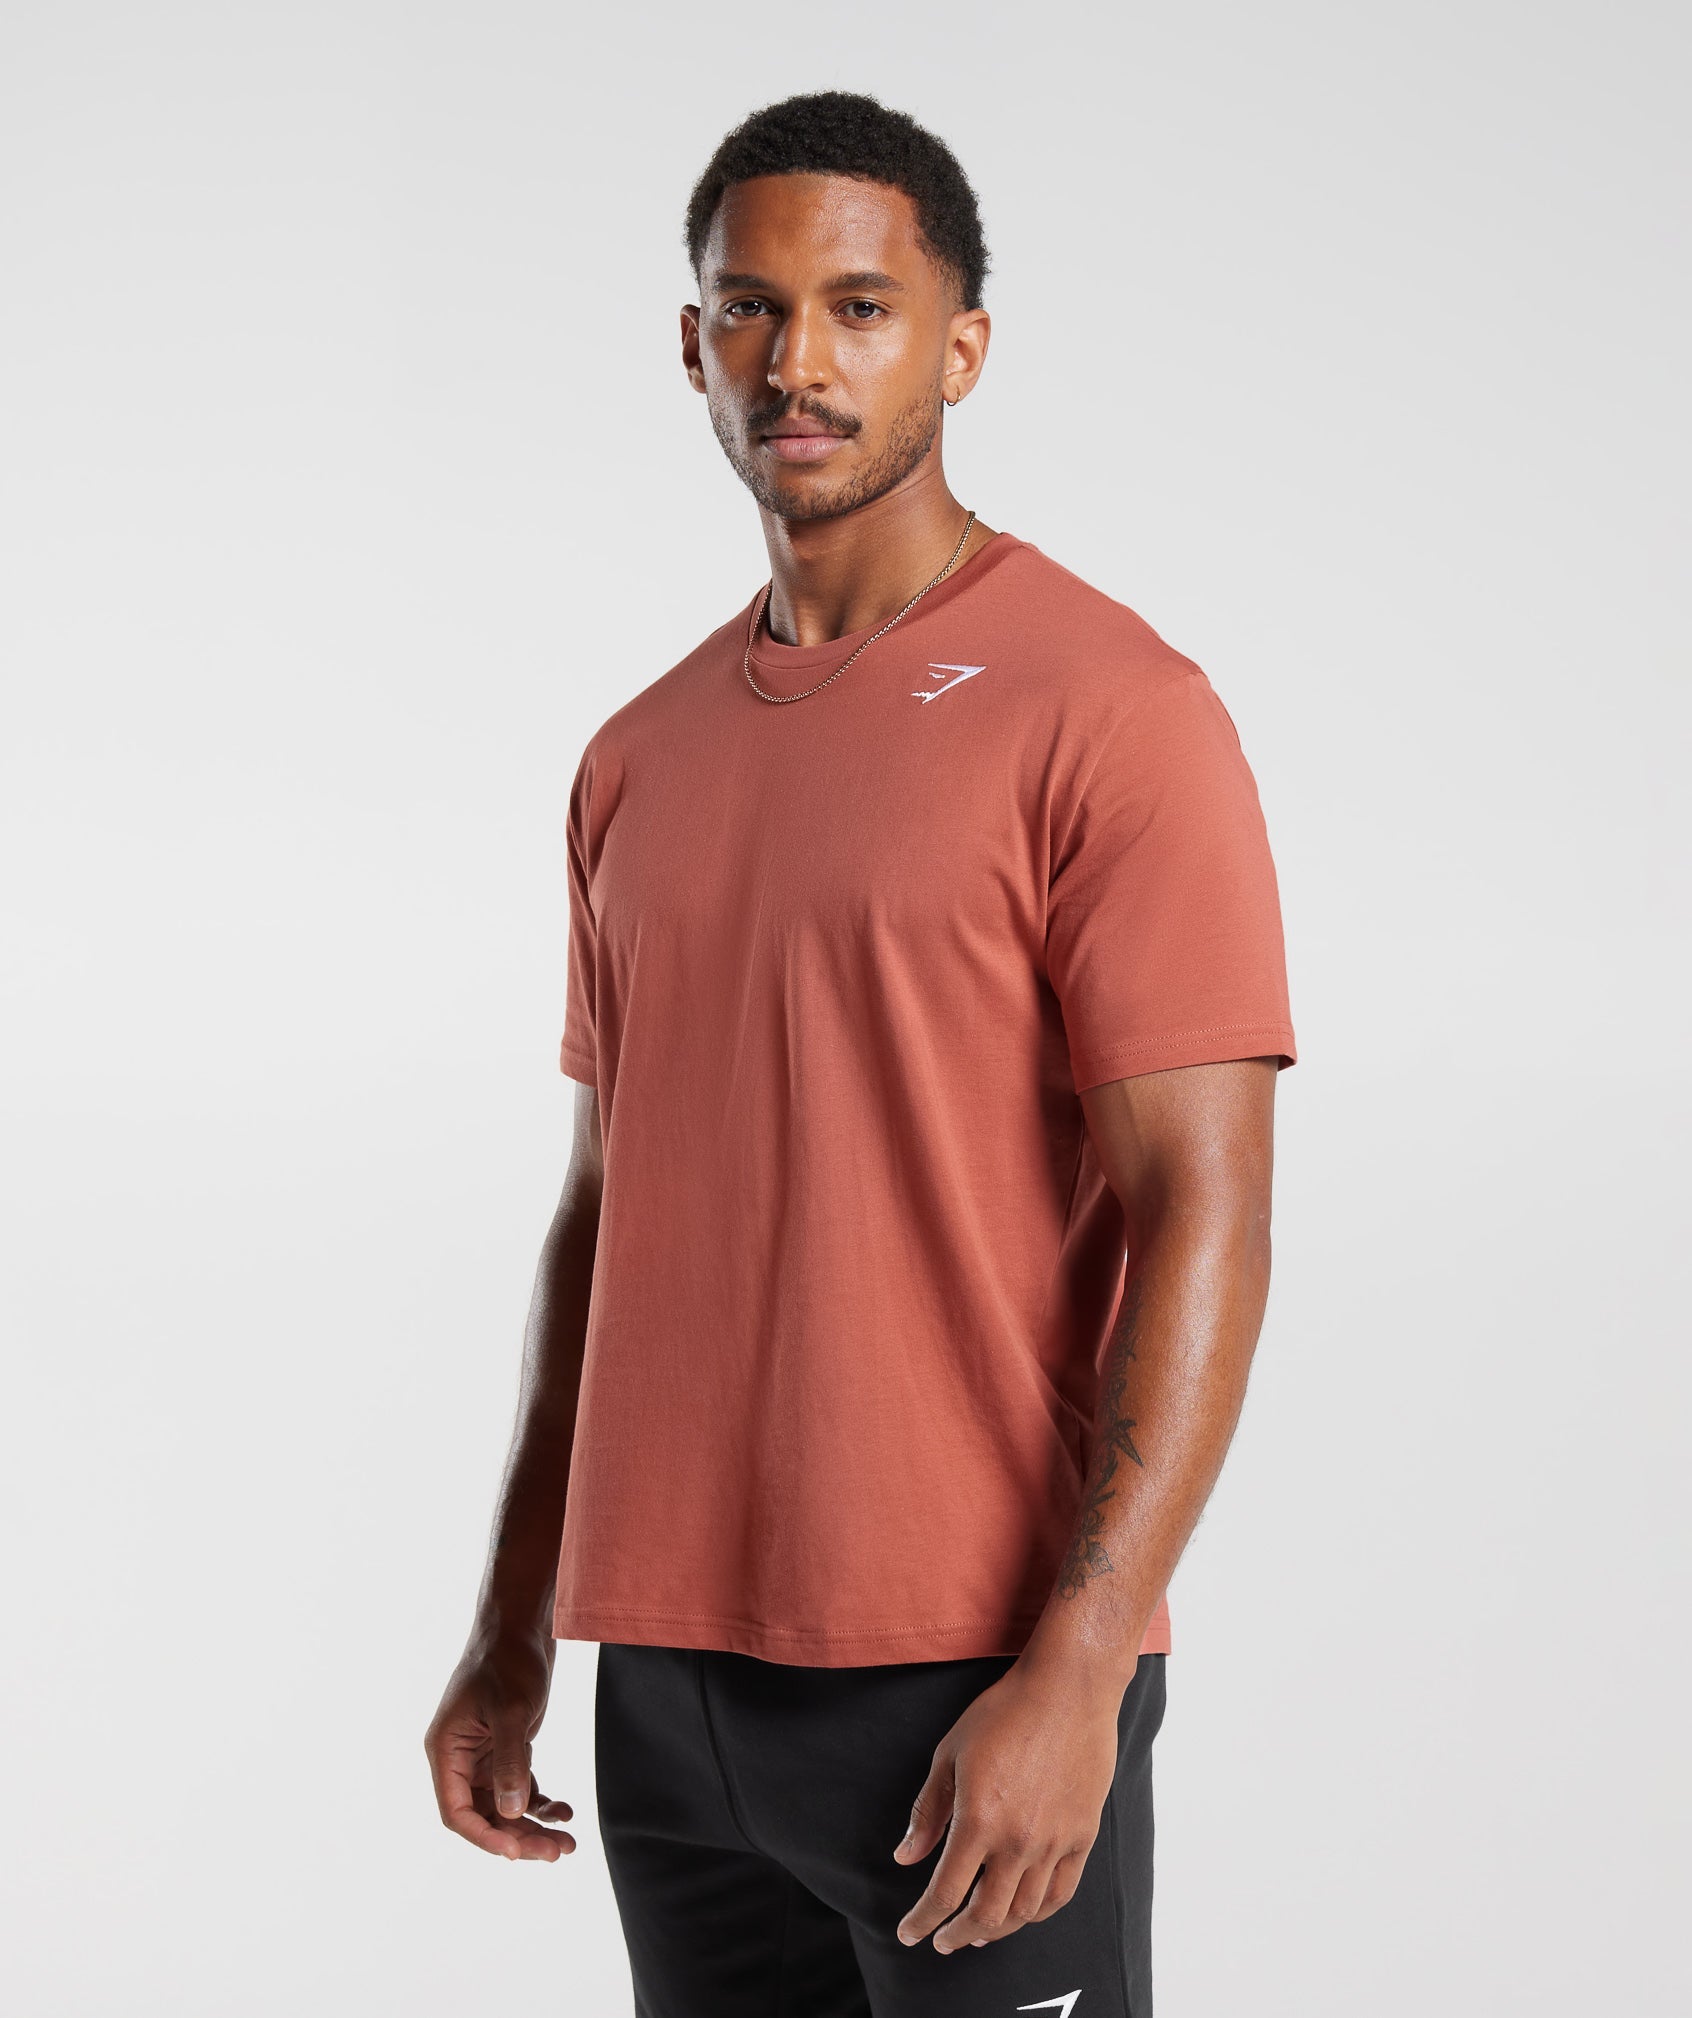 Crest T-Shirt in Persimmon Red